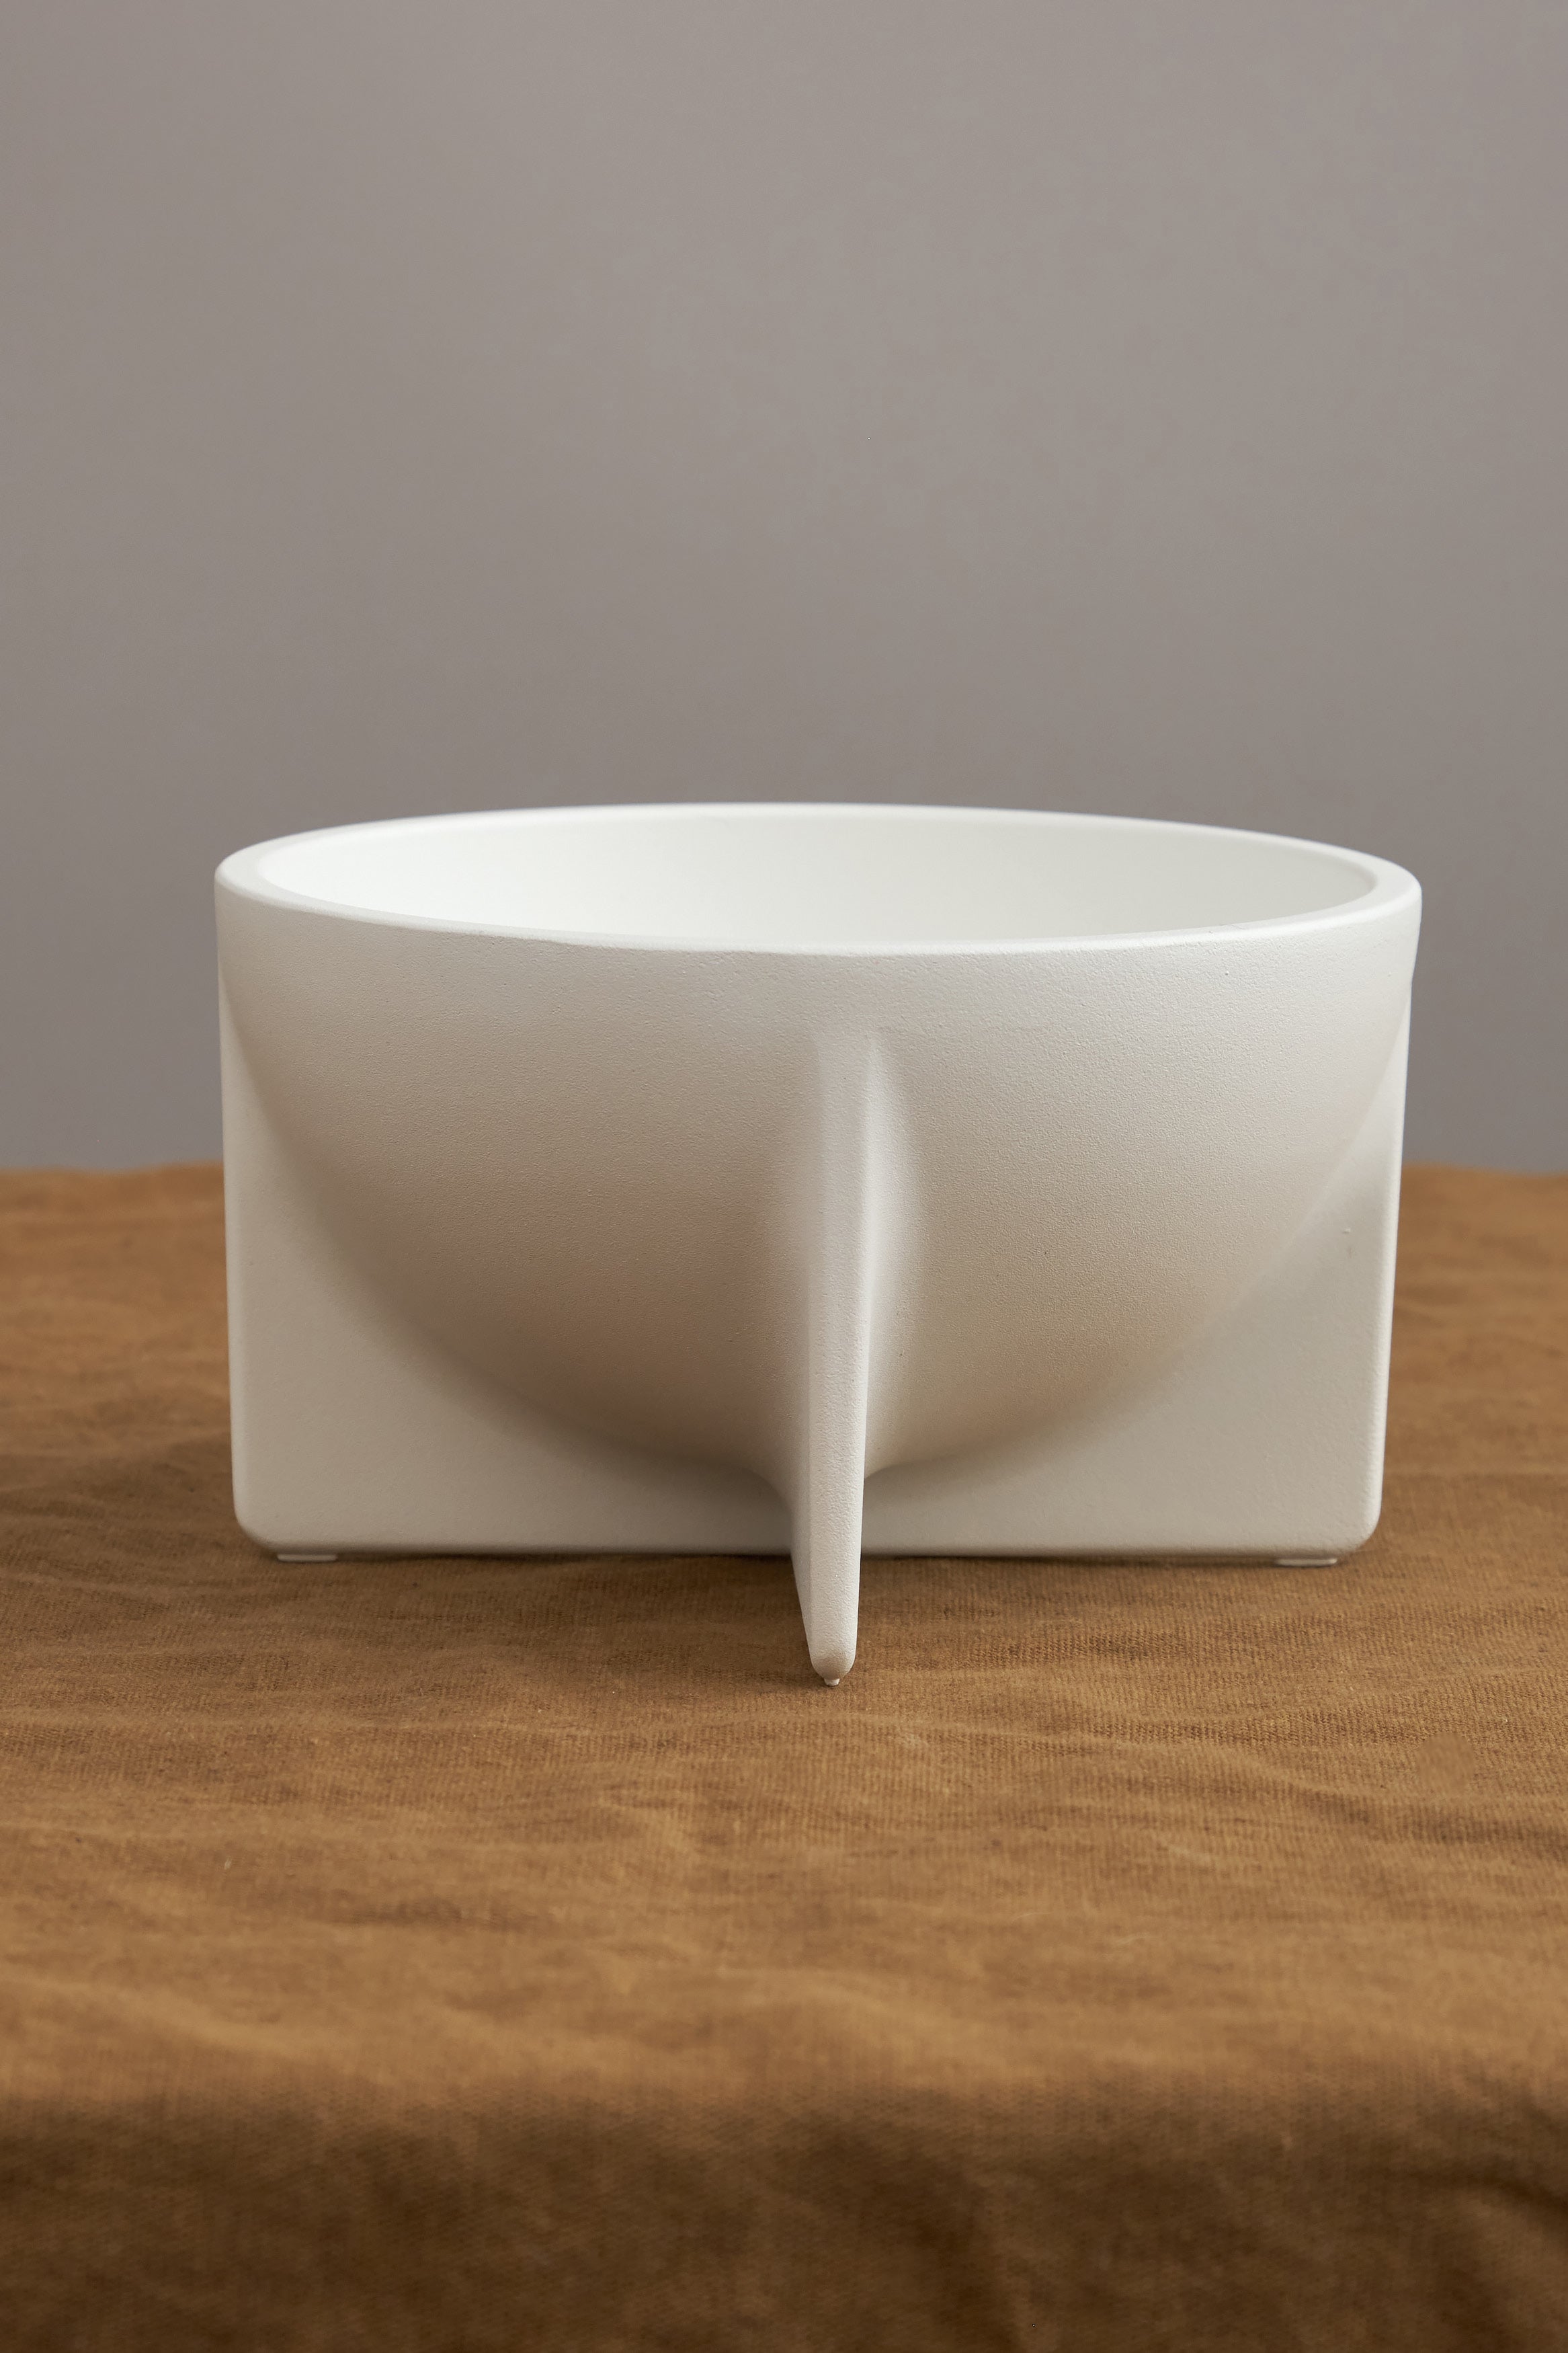 Fort Standard Small Standing Bowl in Alpine